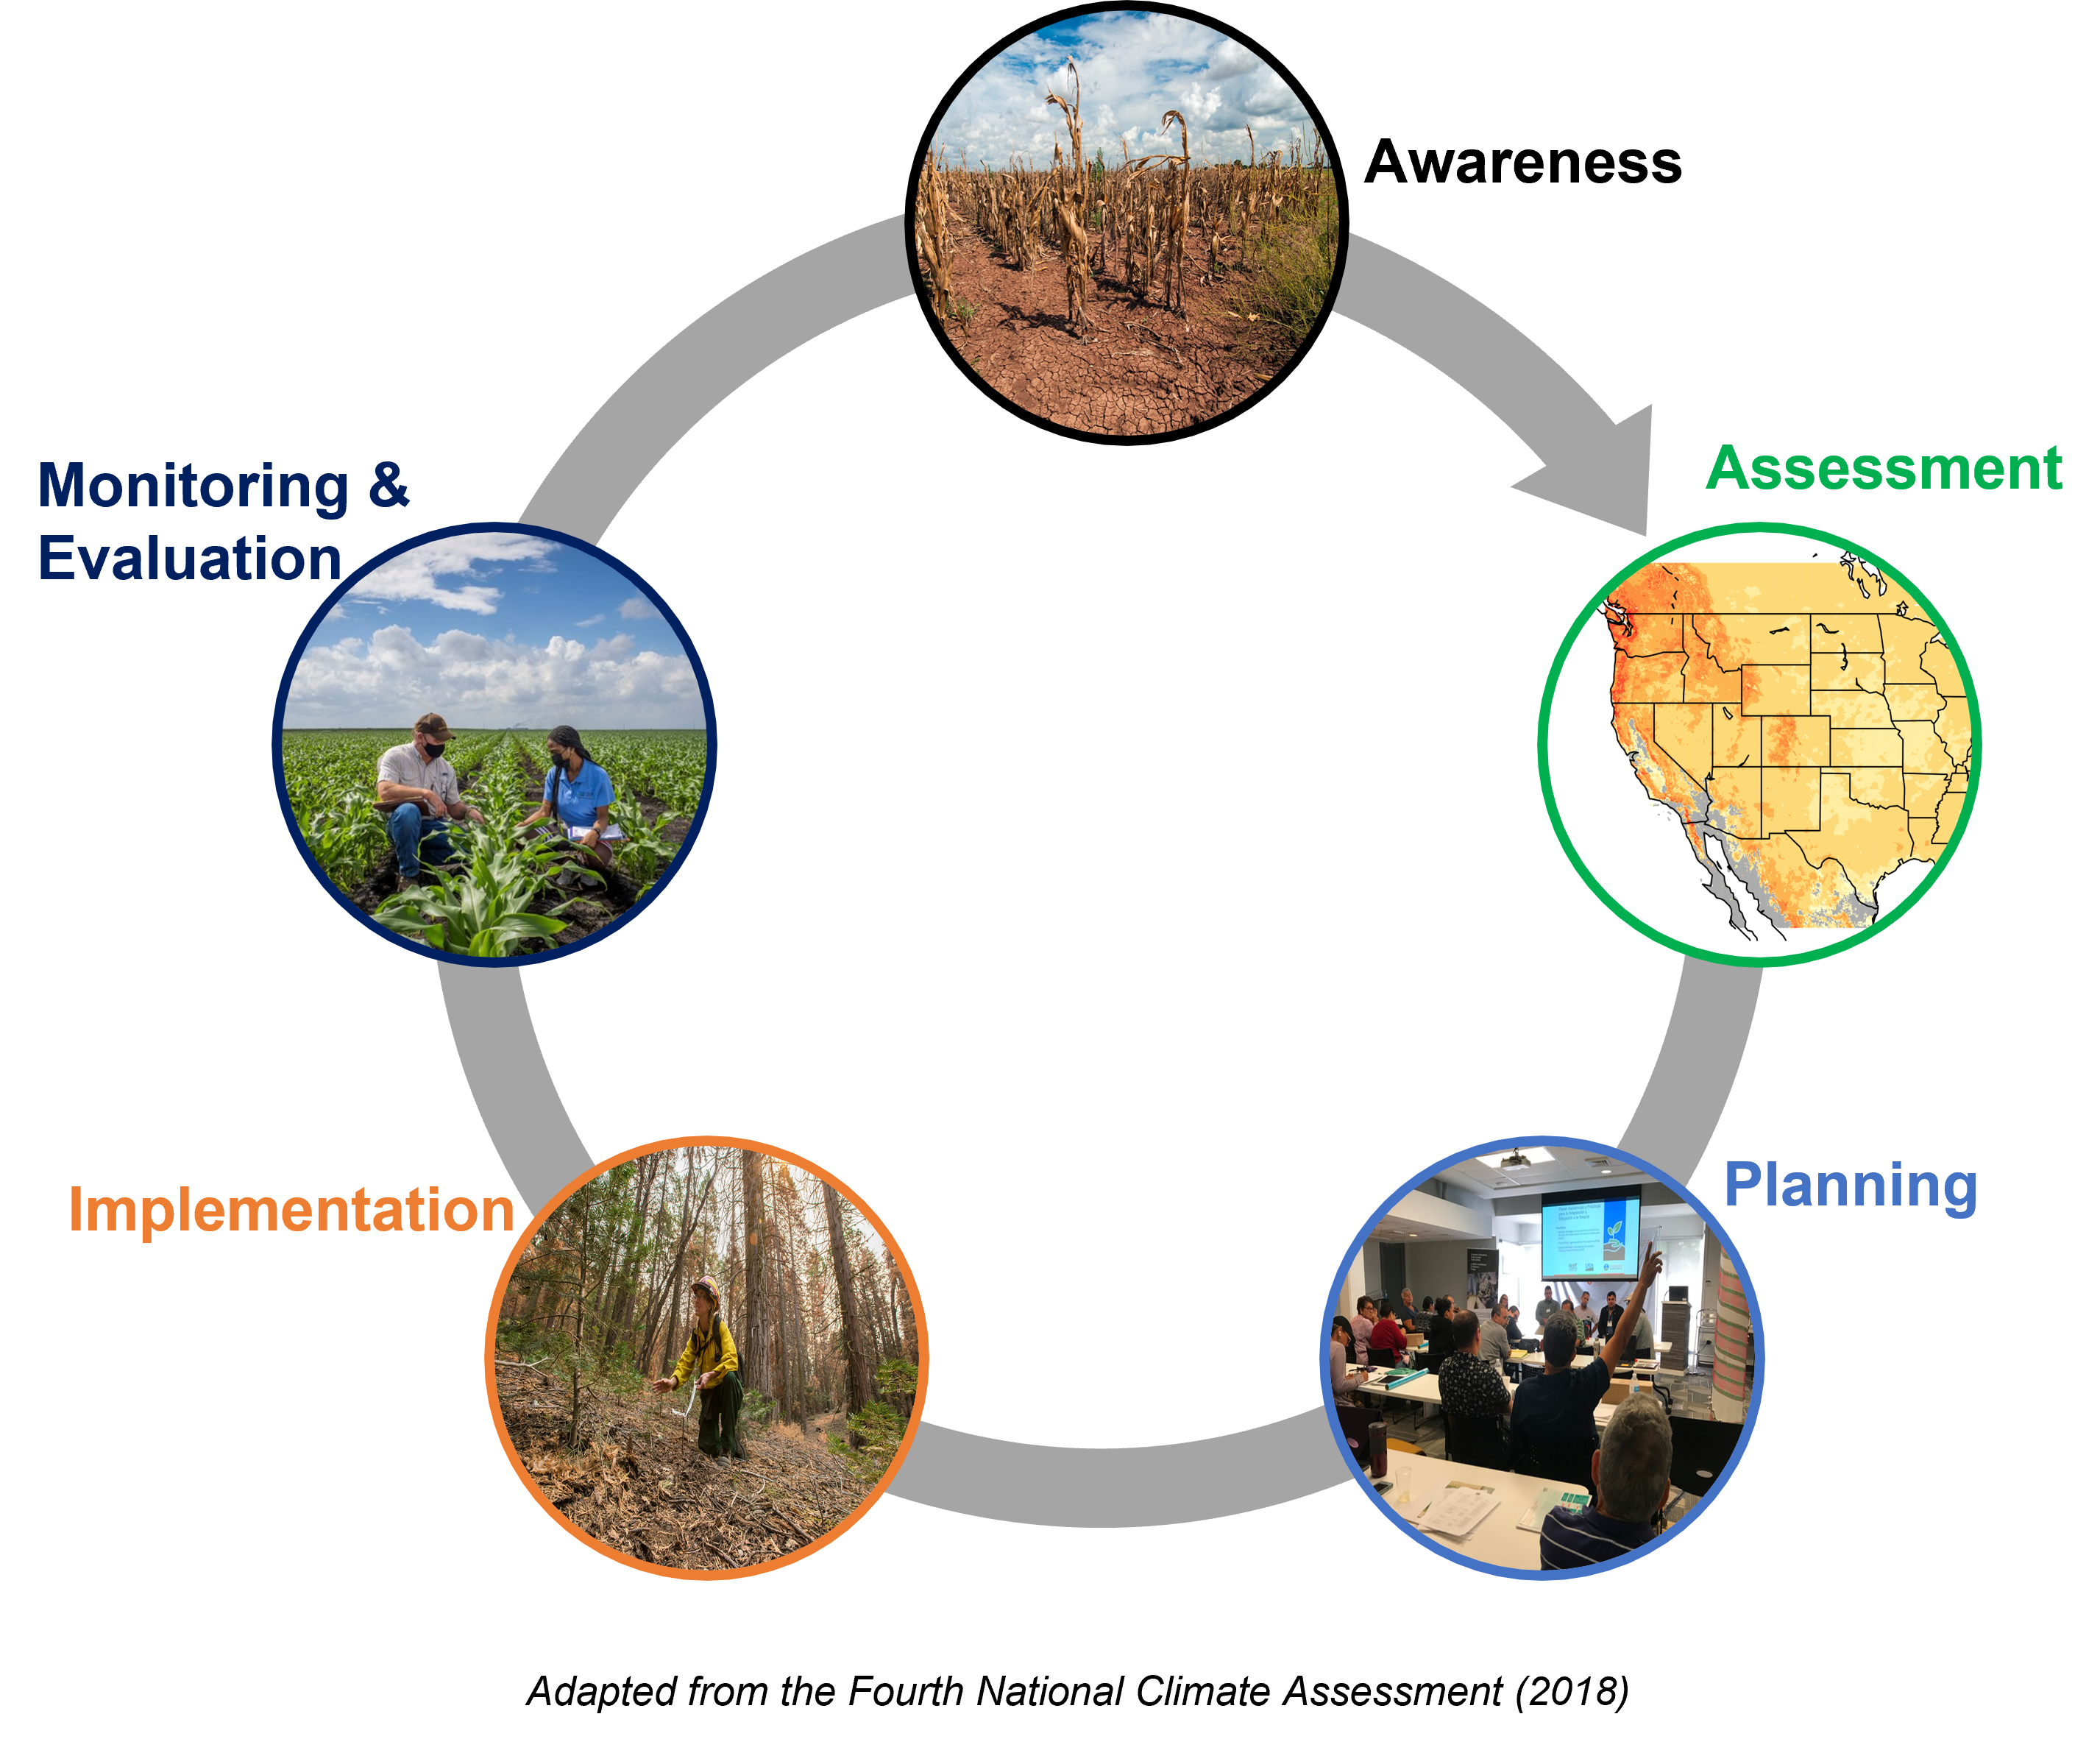 An image referencing the climate adaptation cycle of awareness, assessment, planning, implementation, and monitoring and evaluation.